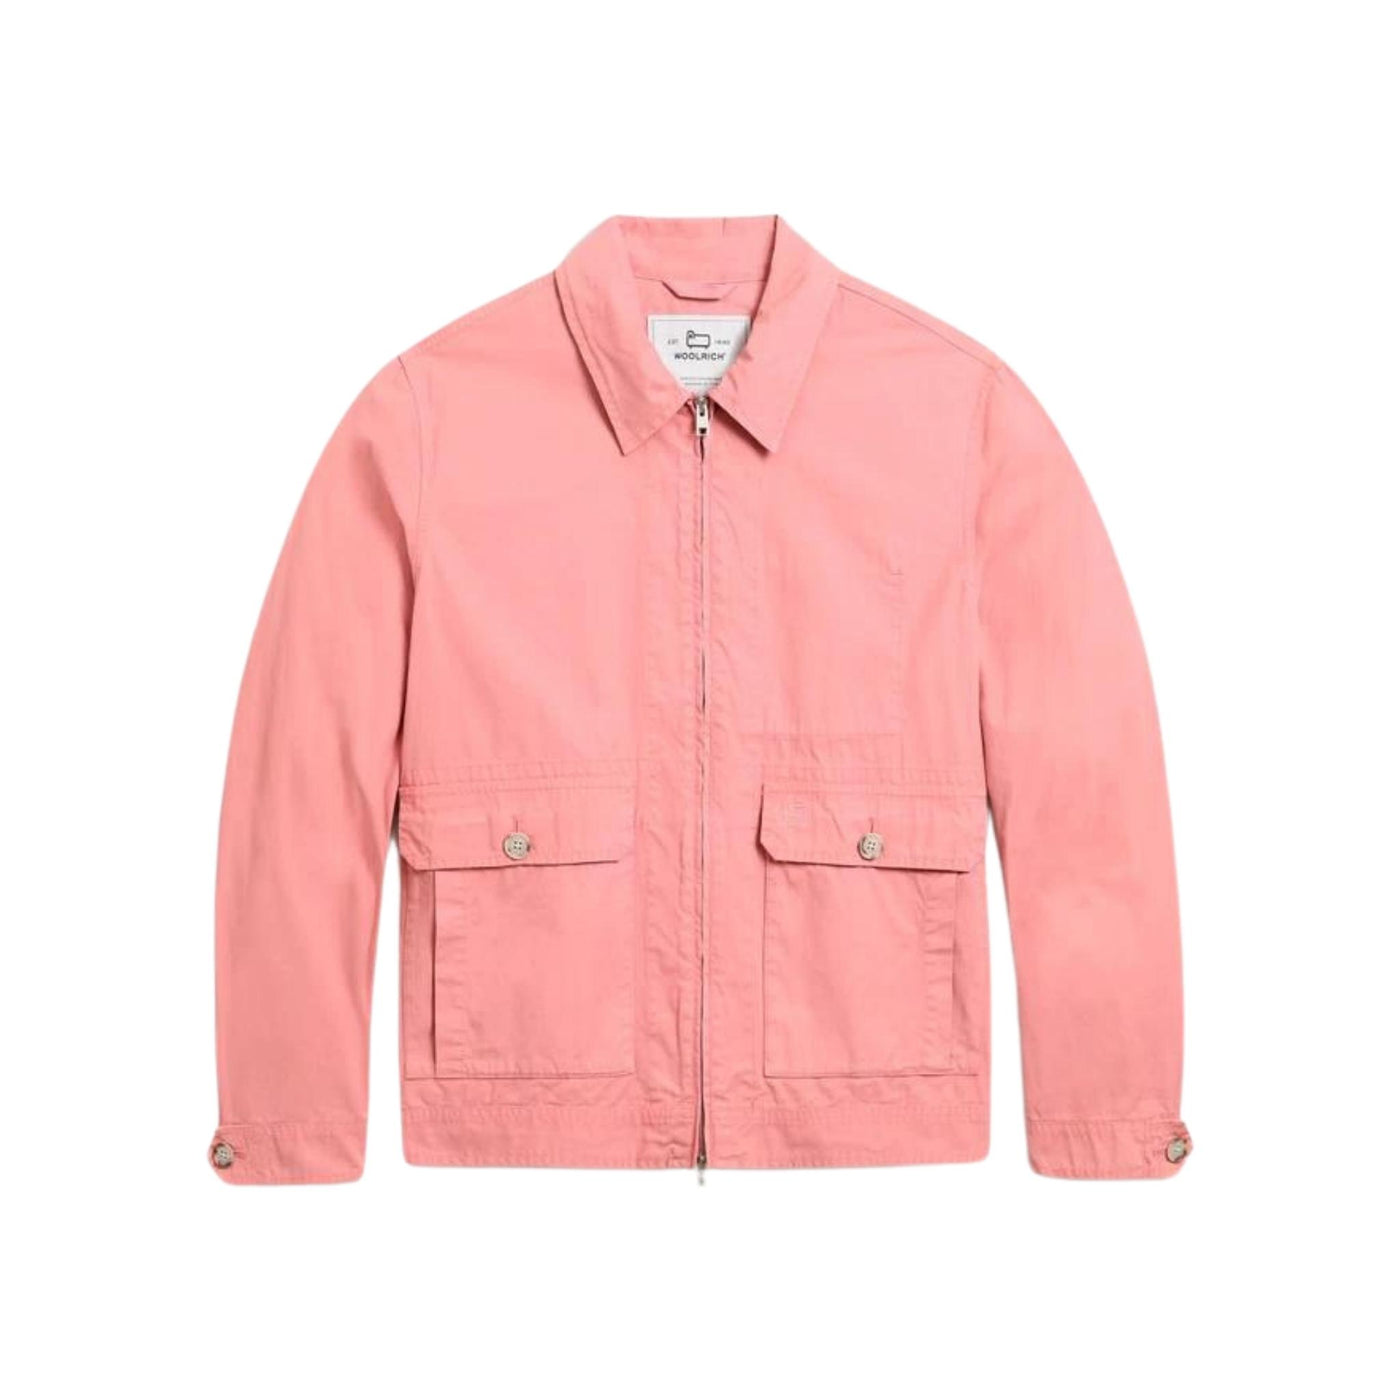 giacca uomo woolrich stile bomber in cotone rosa